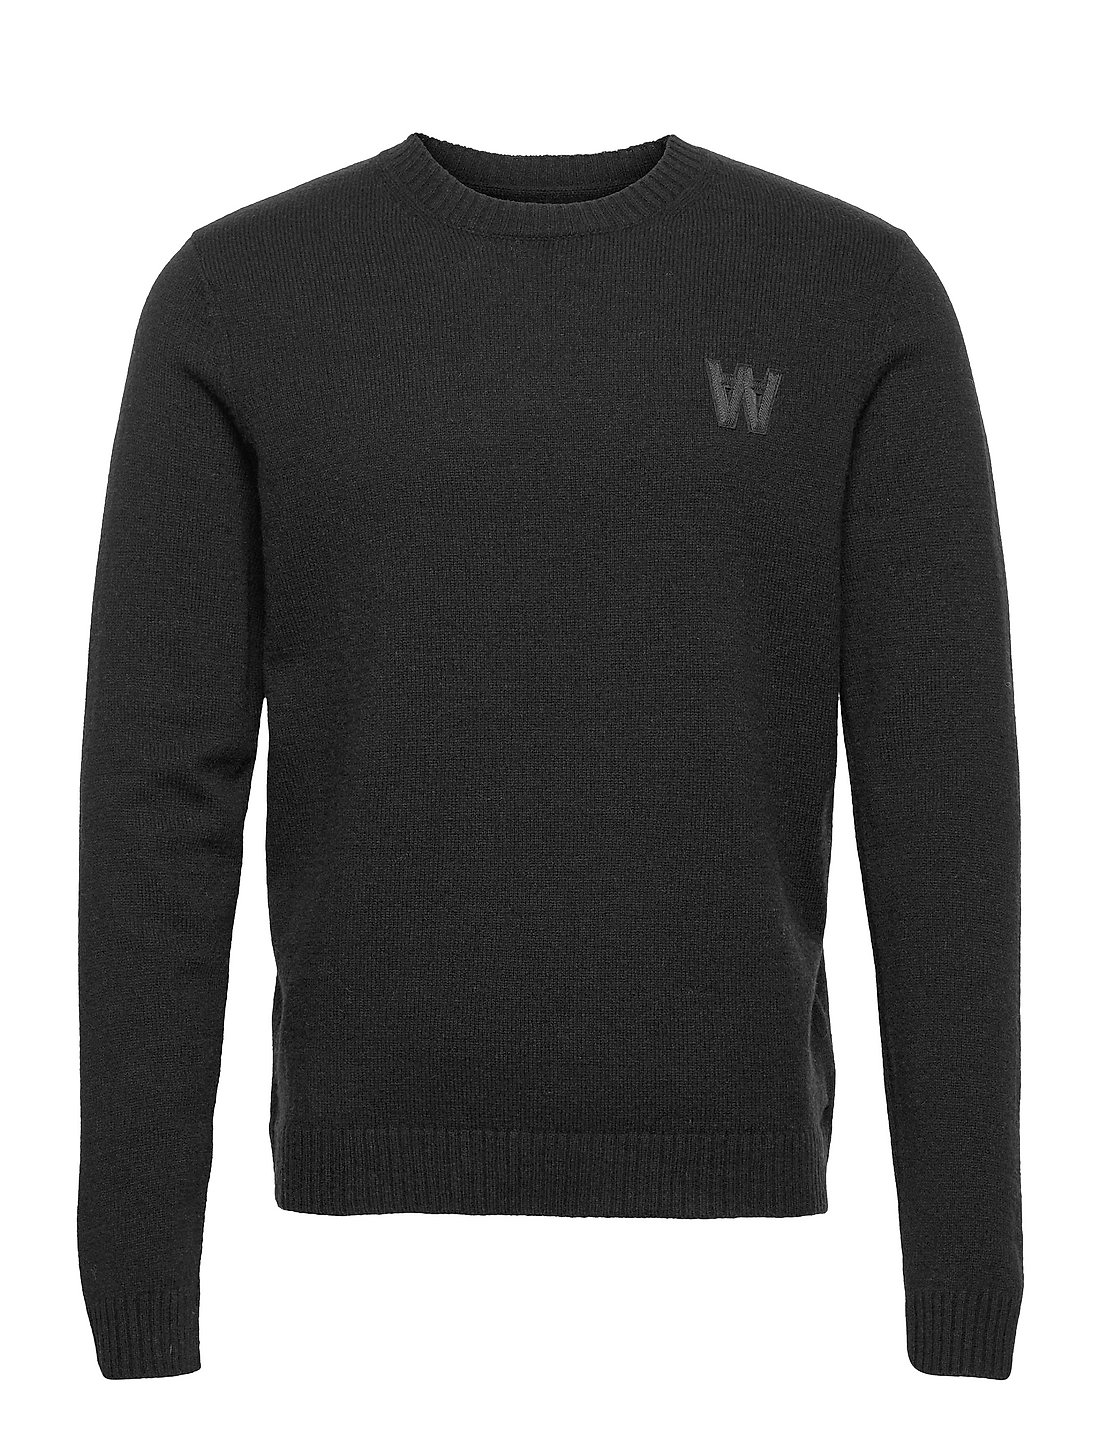 Double Wood Kevin Lambswool Jumper - Round Necks - Boozt.com